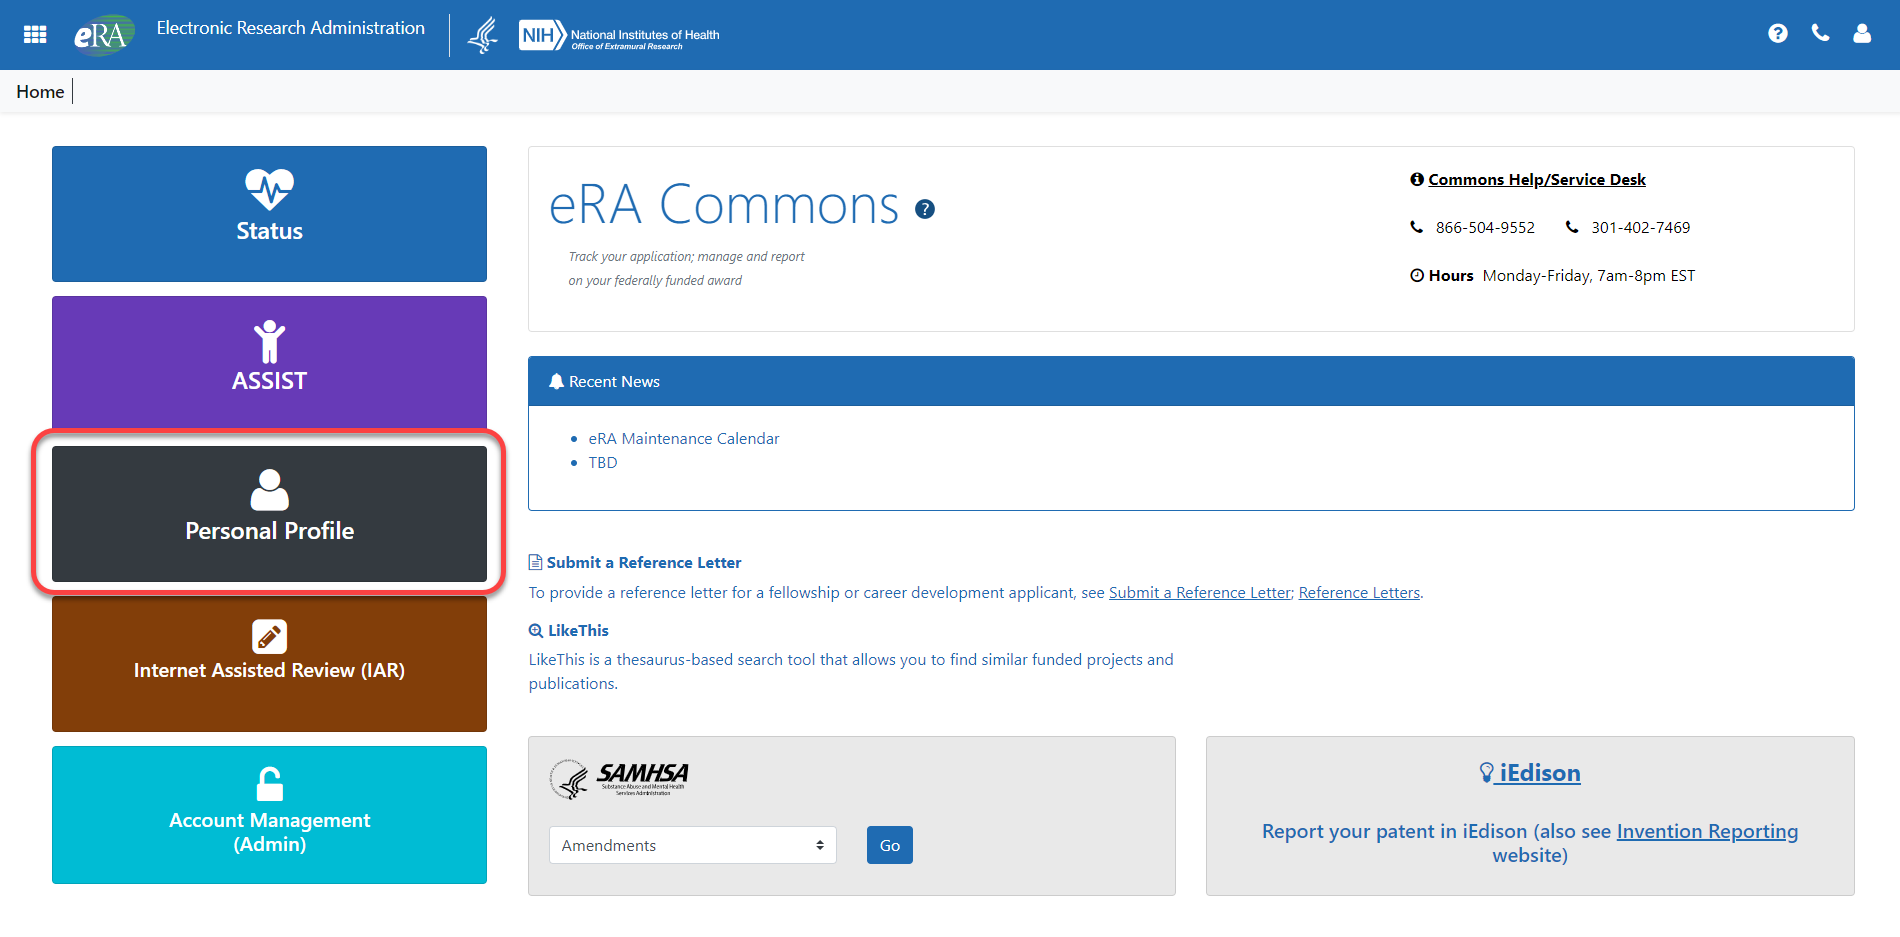 eRA Commons landing page showing the Personal Profile button